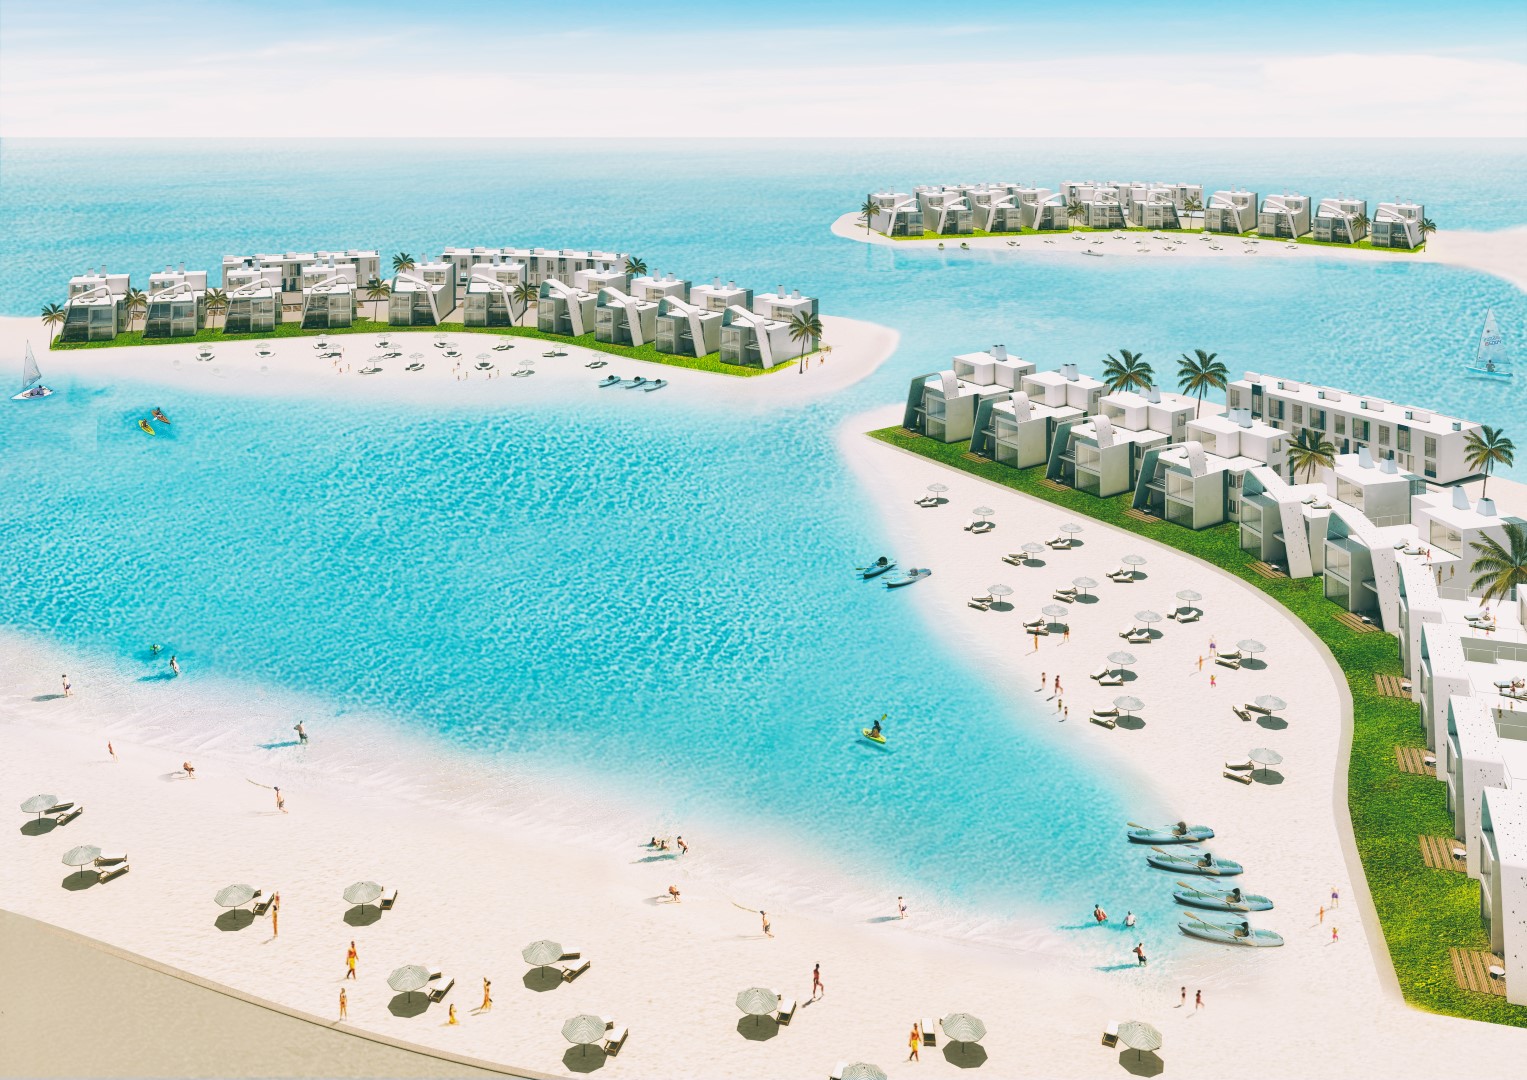 Hurry up to book at D Bay Resort in North Coast units starting from 125m²